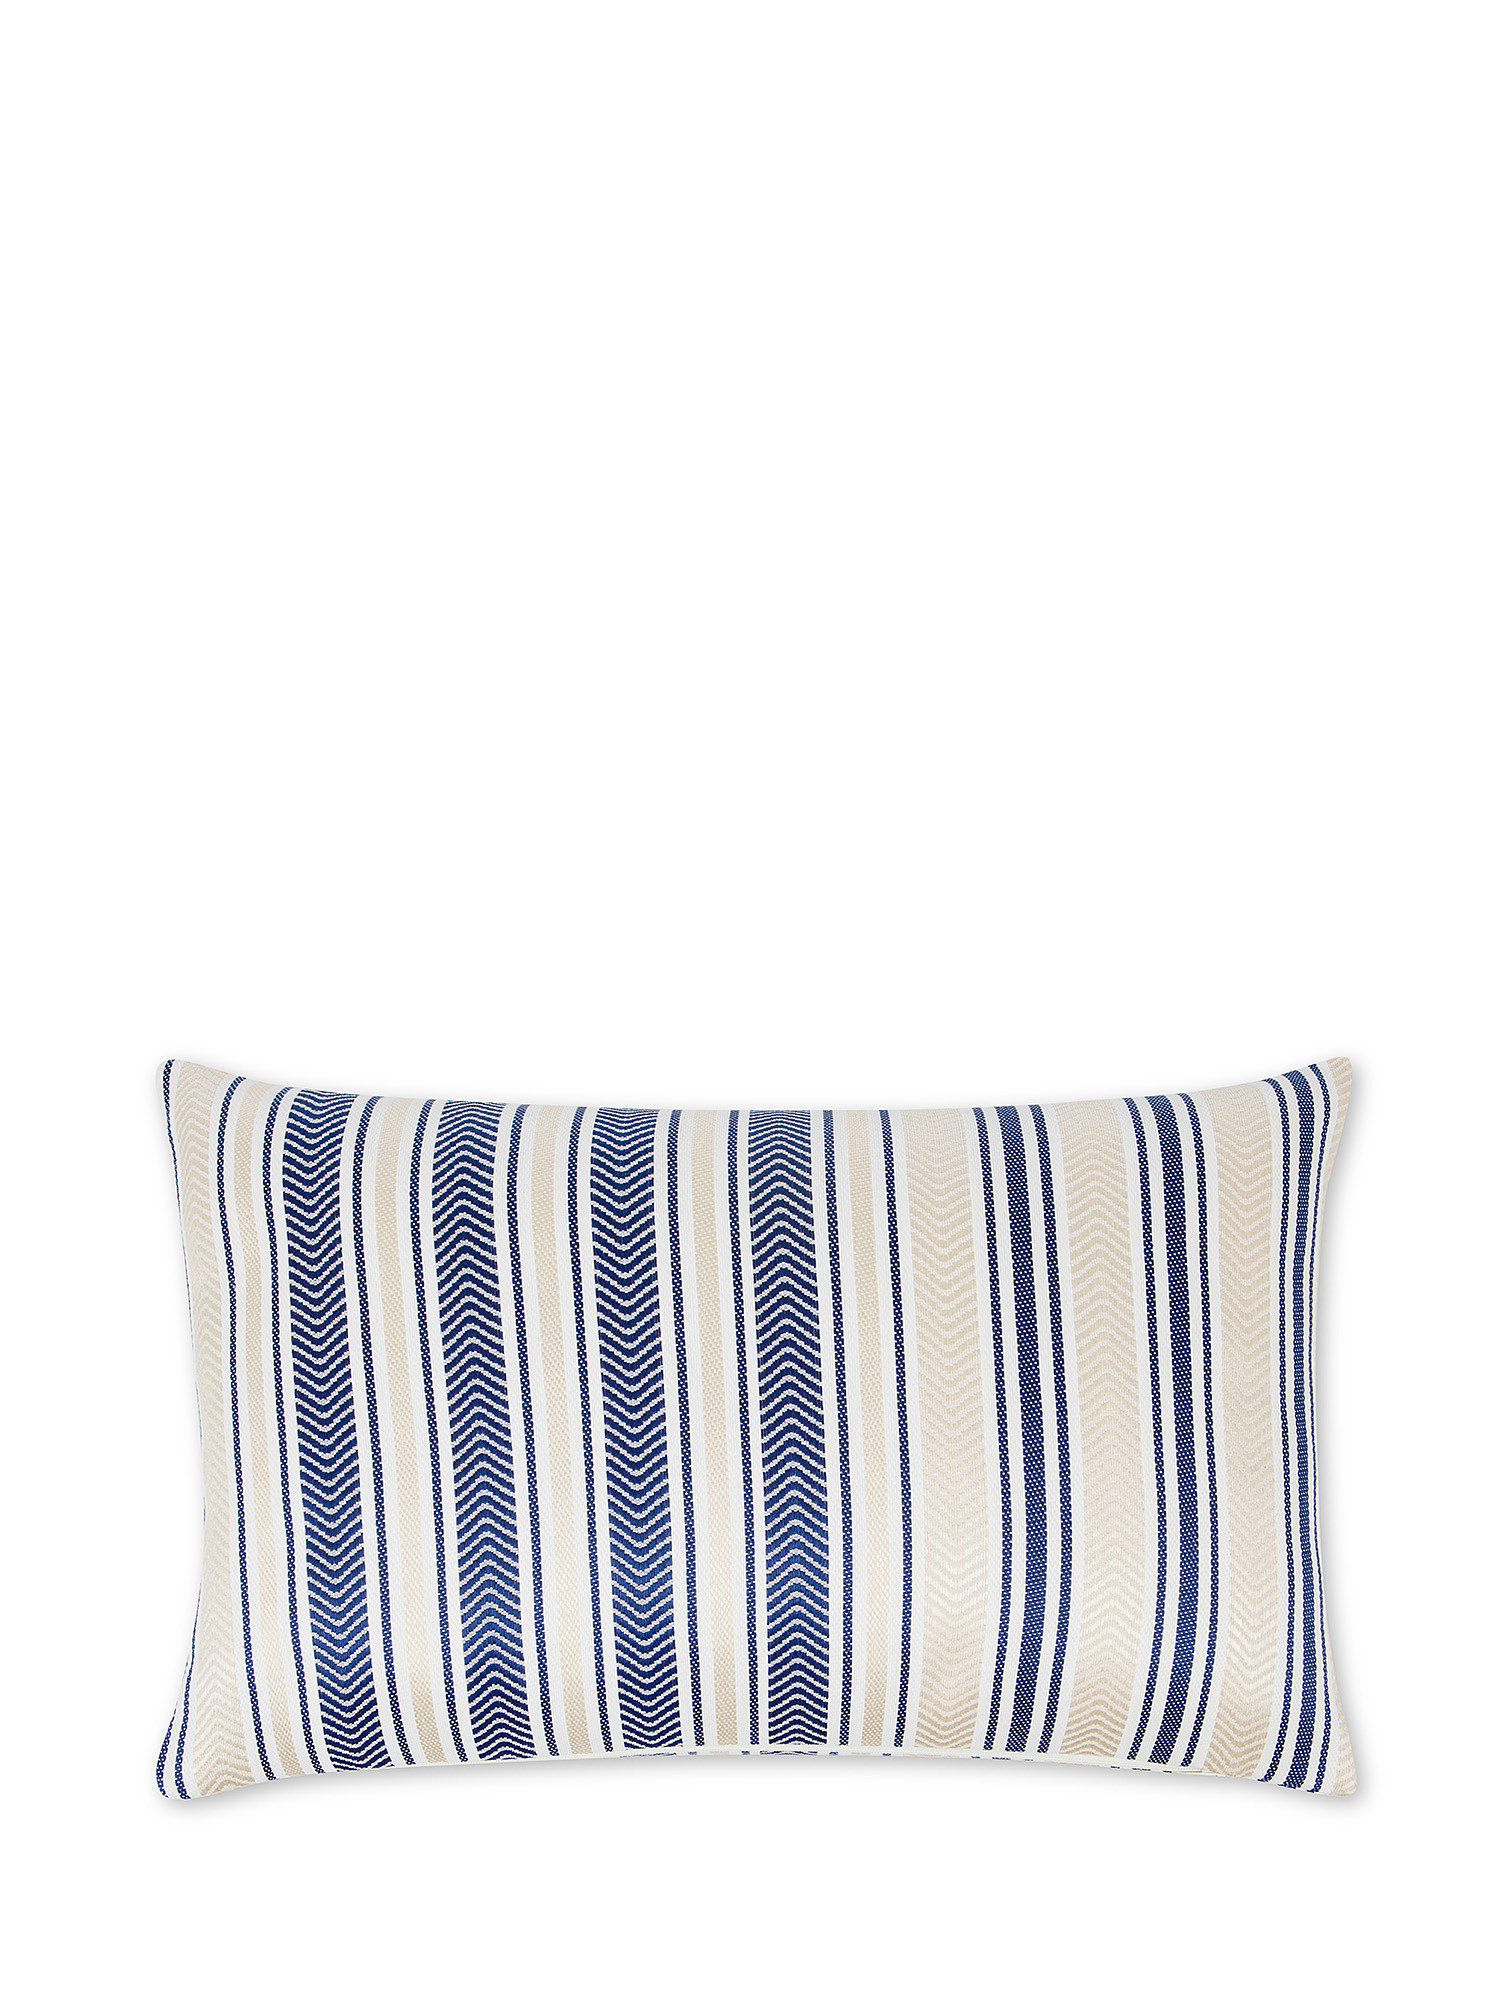 35x55 cm outdoor cushion with striped pattern, with zip and padding., Beige, large image number 1